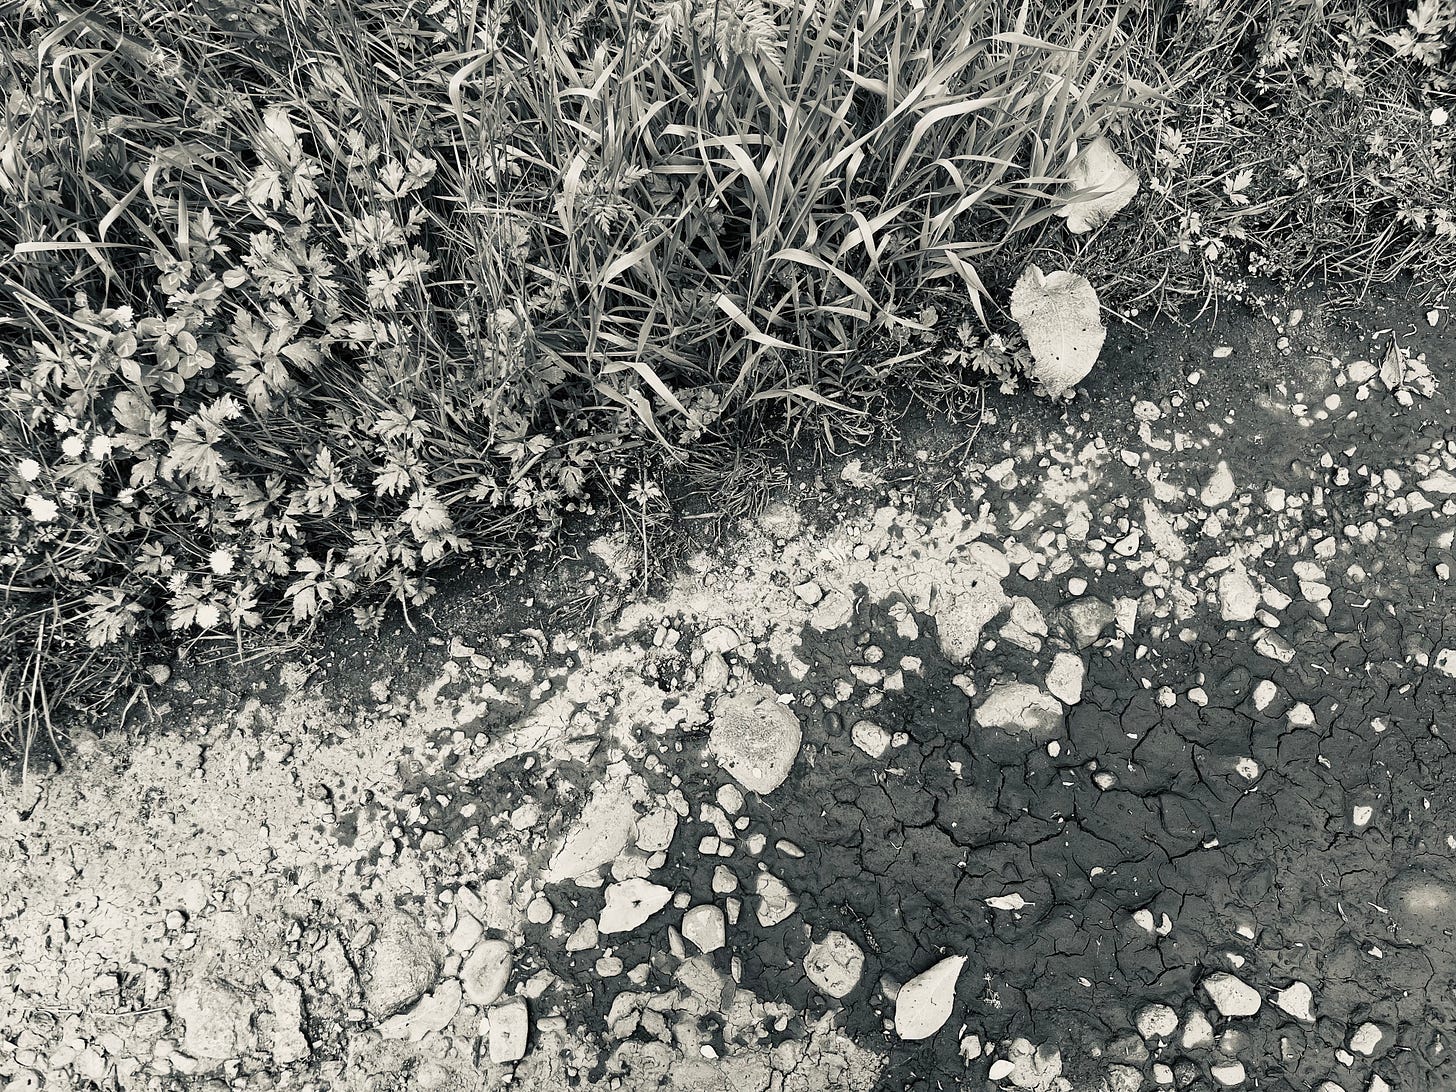 A black and white view of the edge of the carriage drive picks up the contrasting lines and shapes of daisies, clover, buttercups and grasses offset against pale stone and dark cracked mud in a drying puddle